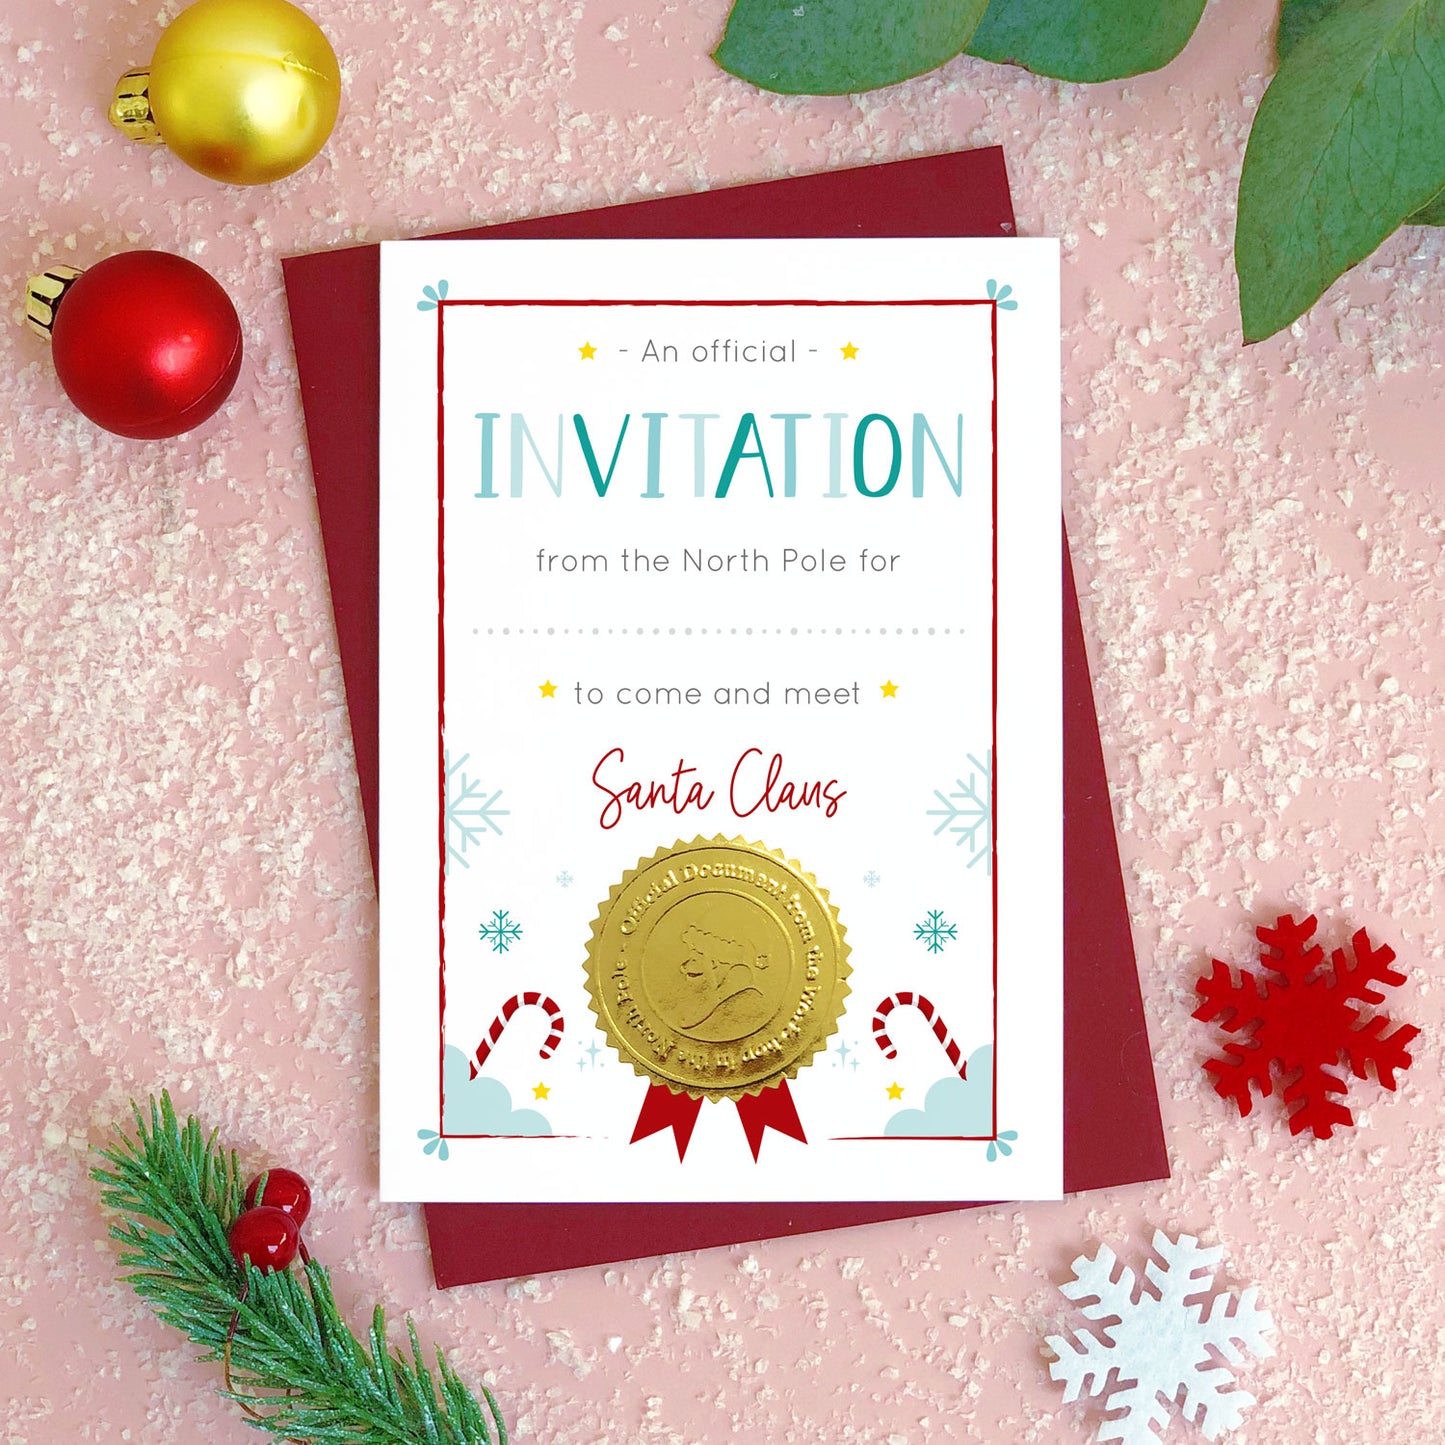 An invitation certificate to visit Santa (or Father Christmas) photographed flat lay style on top of a pink background covered in ‘snow’, pieces of foliage, snowflakes and a bauble. The card has a blank space for you to hand write a childs name. It also features a shiny gold seal with the face of a santa character.